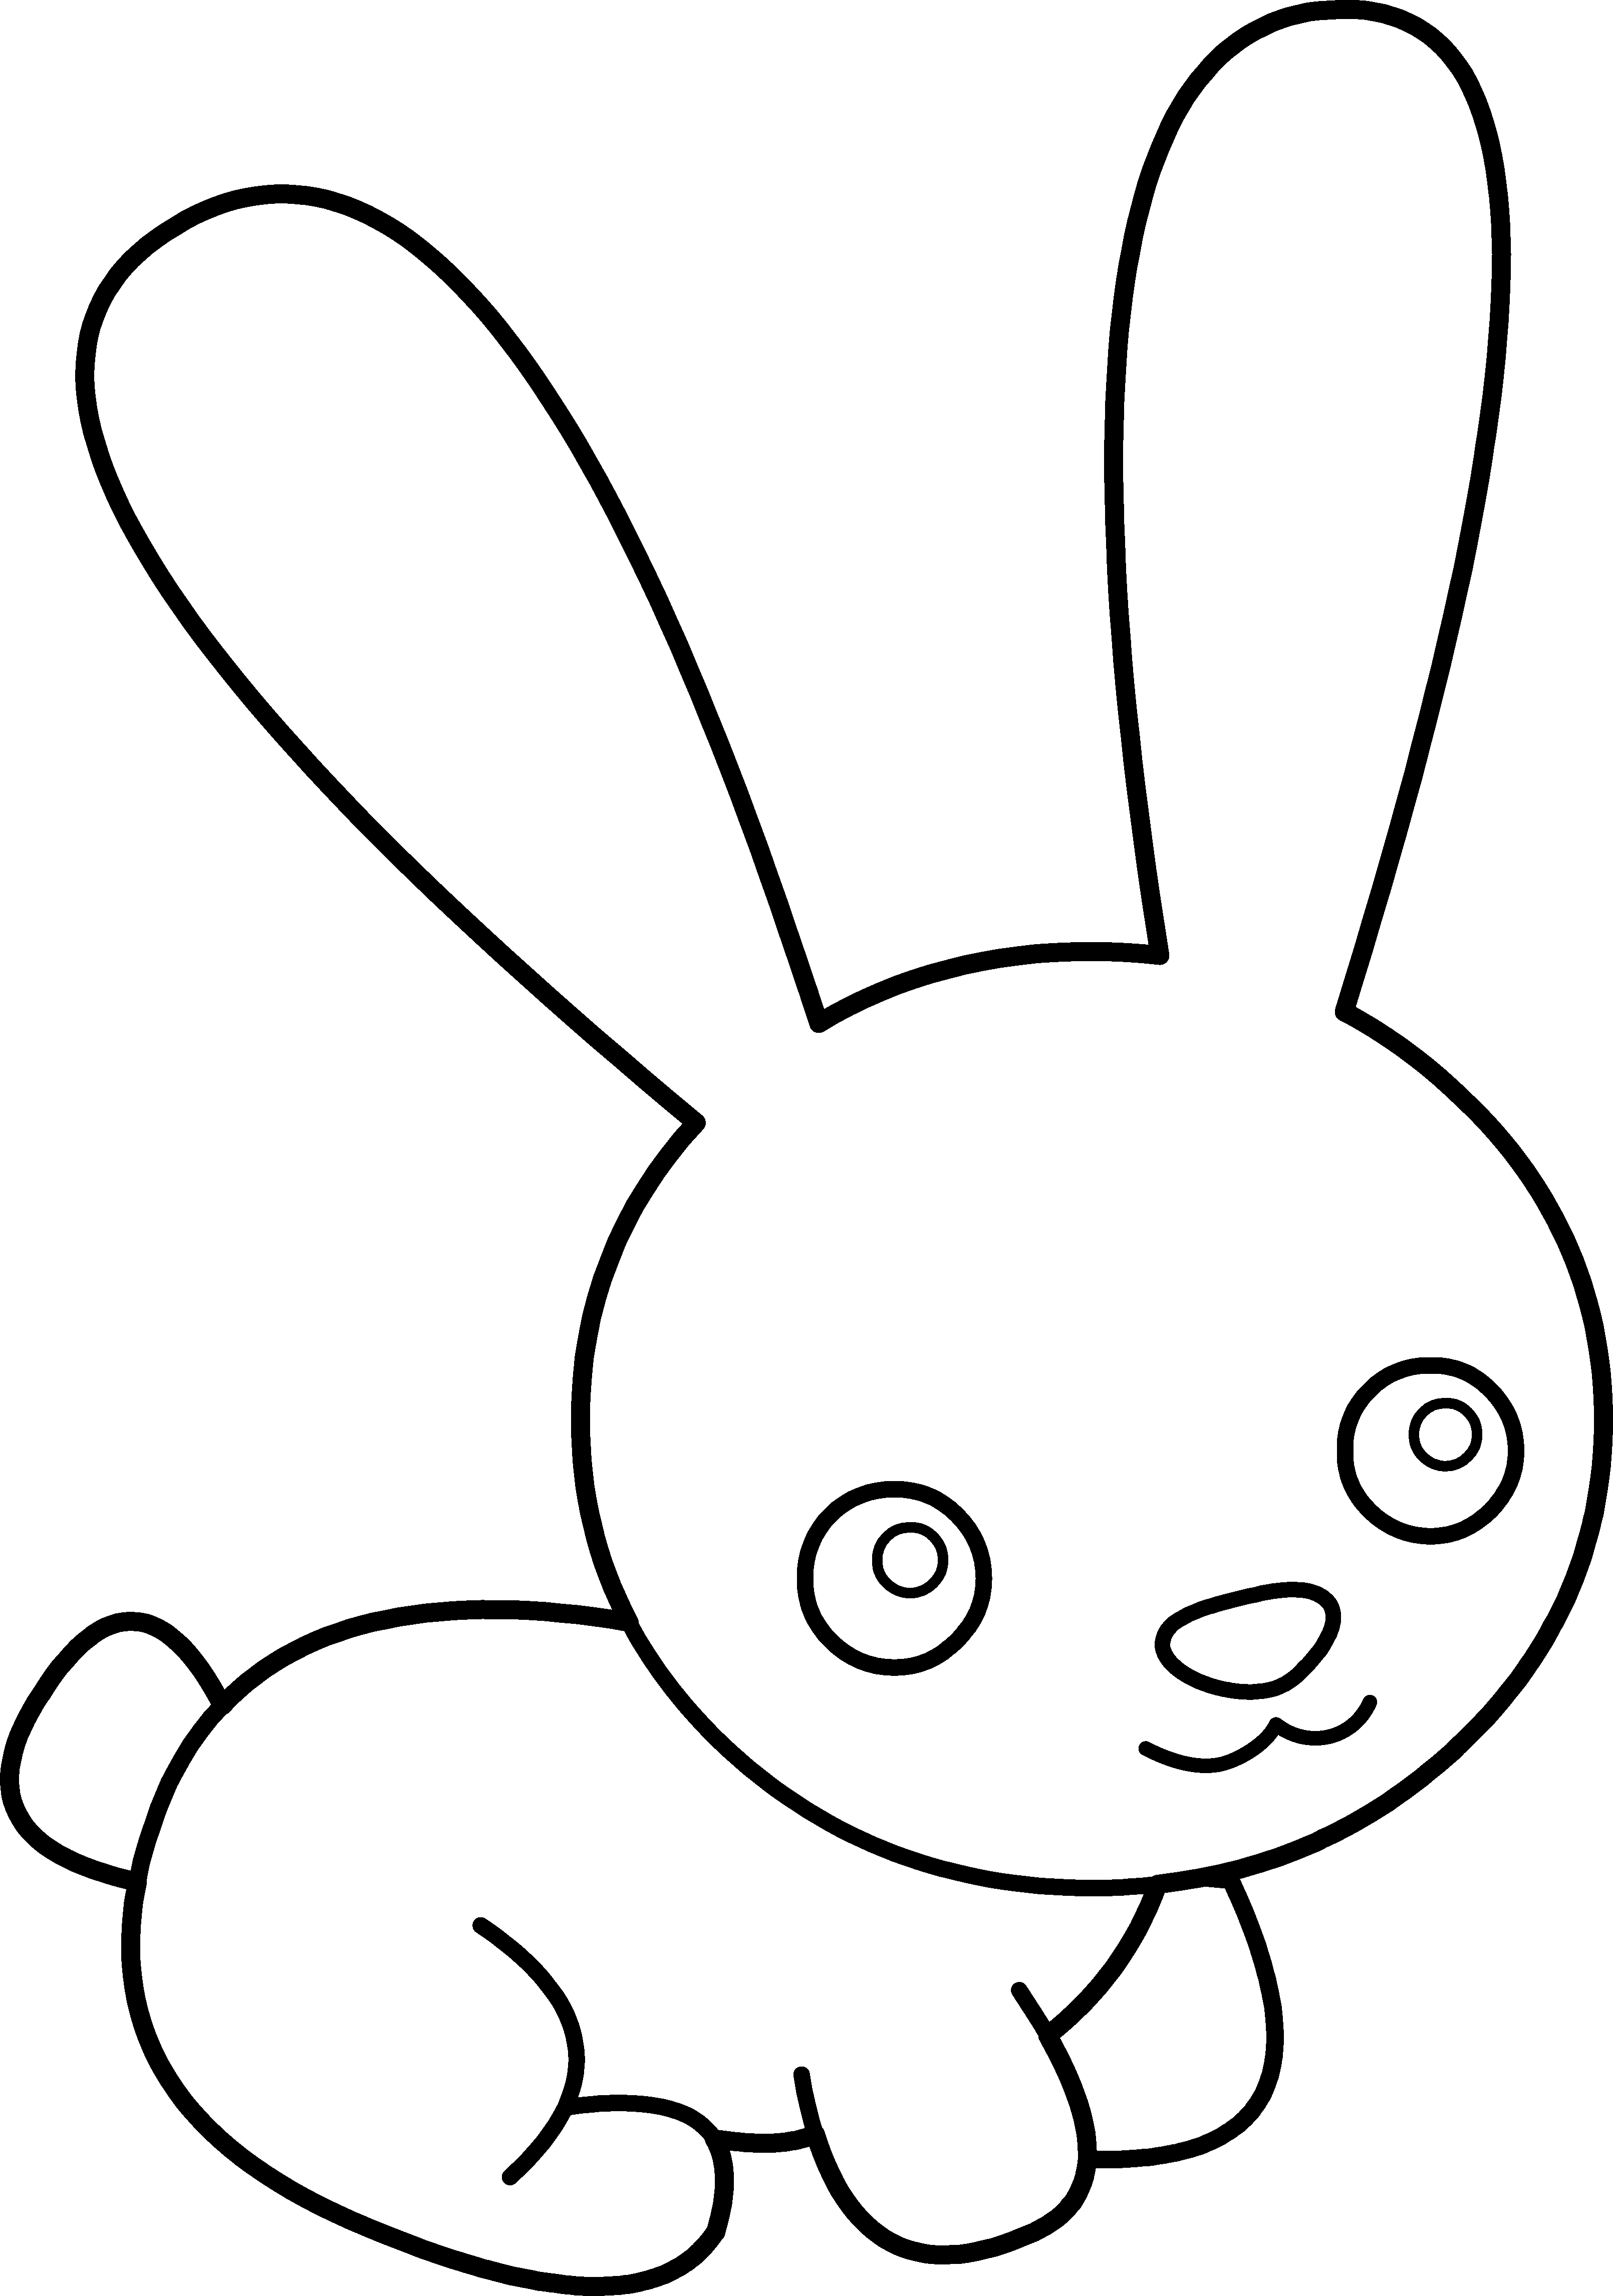 Bunny clip art free coloring clipart cliparts for you